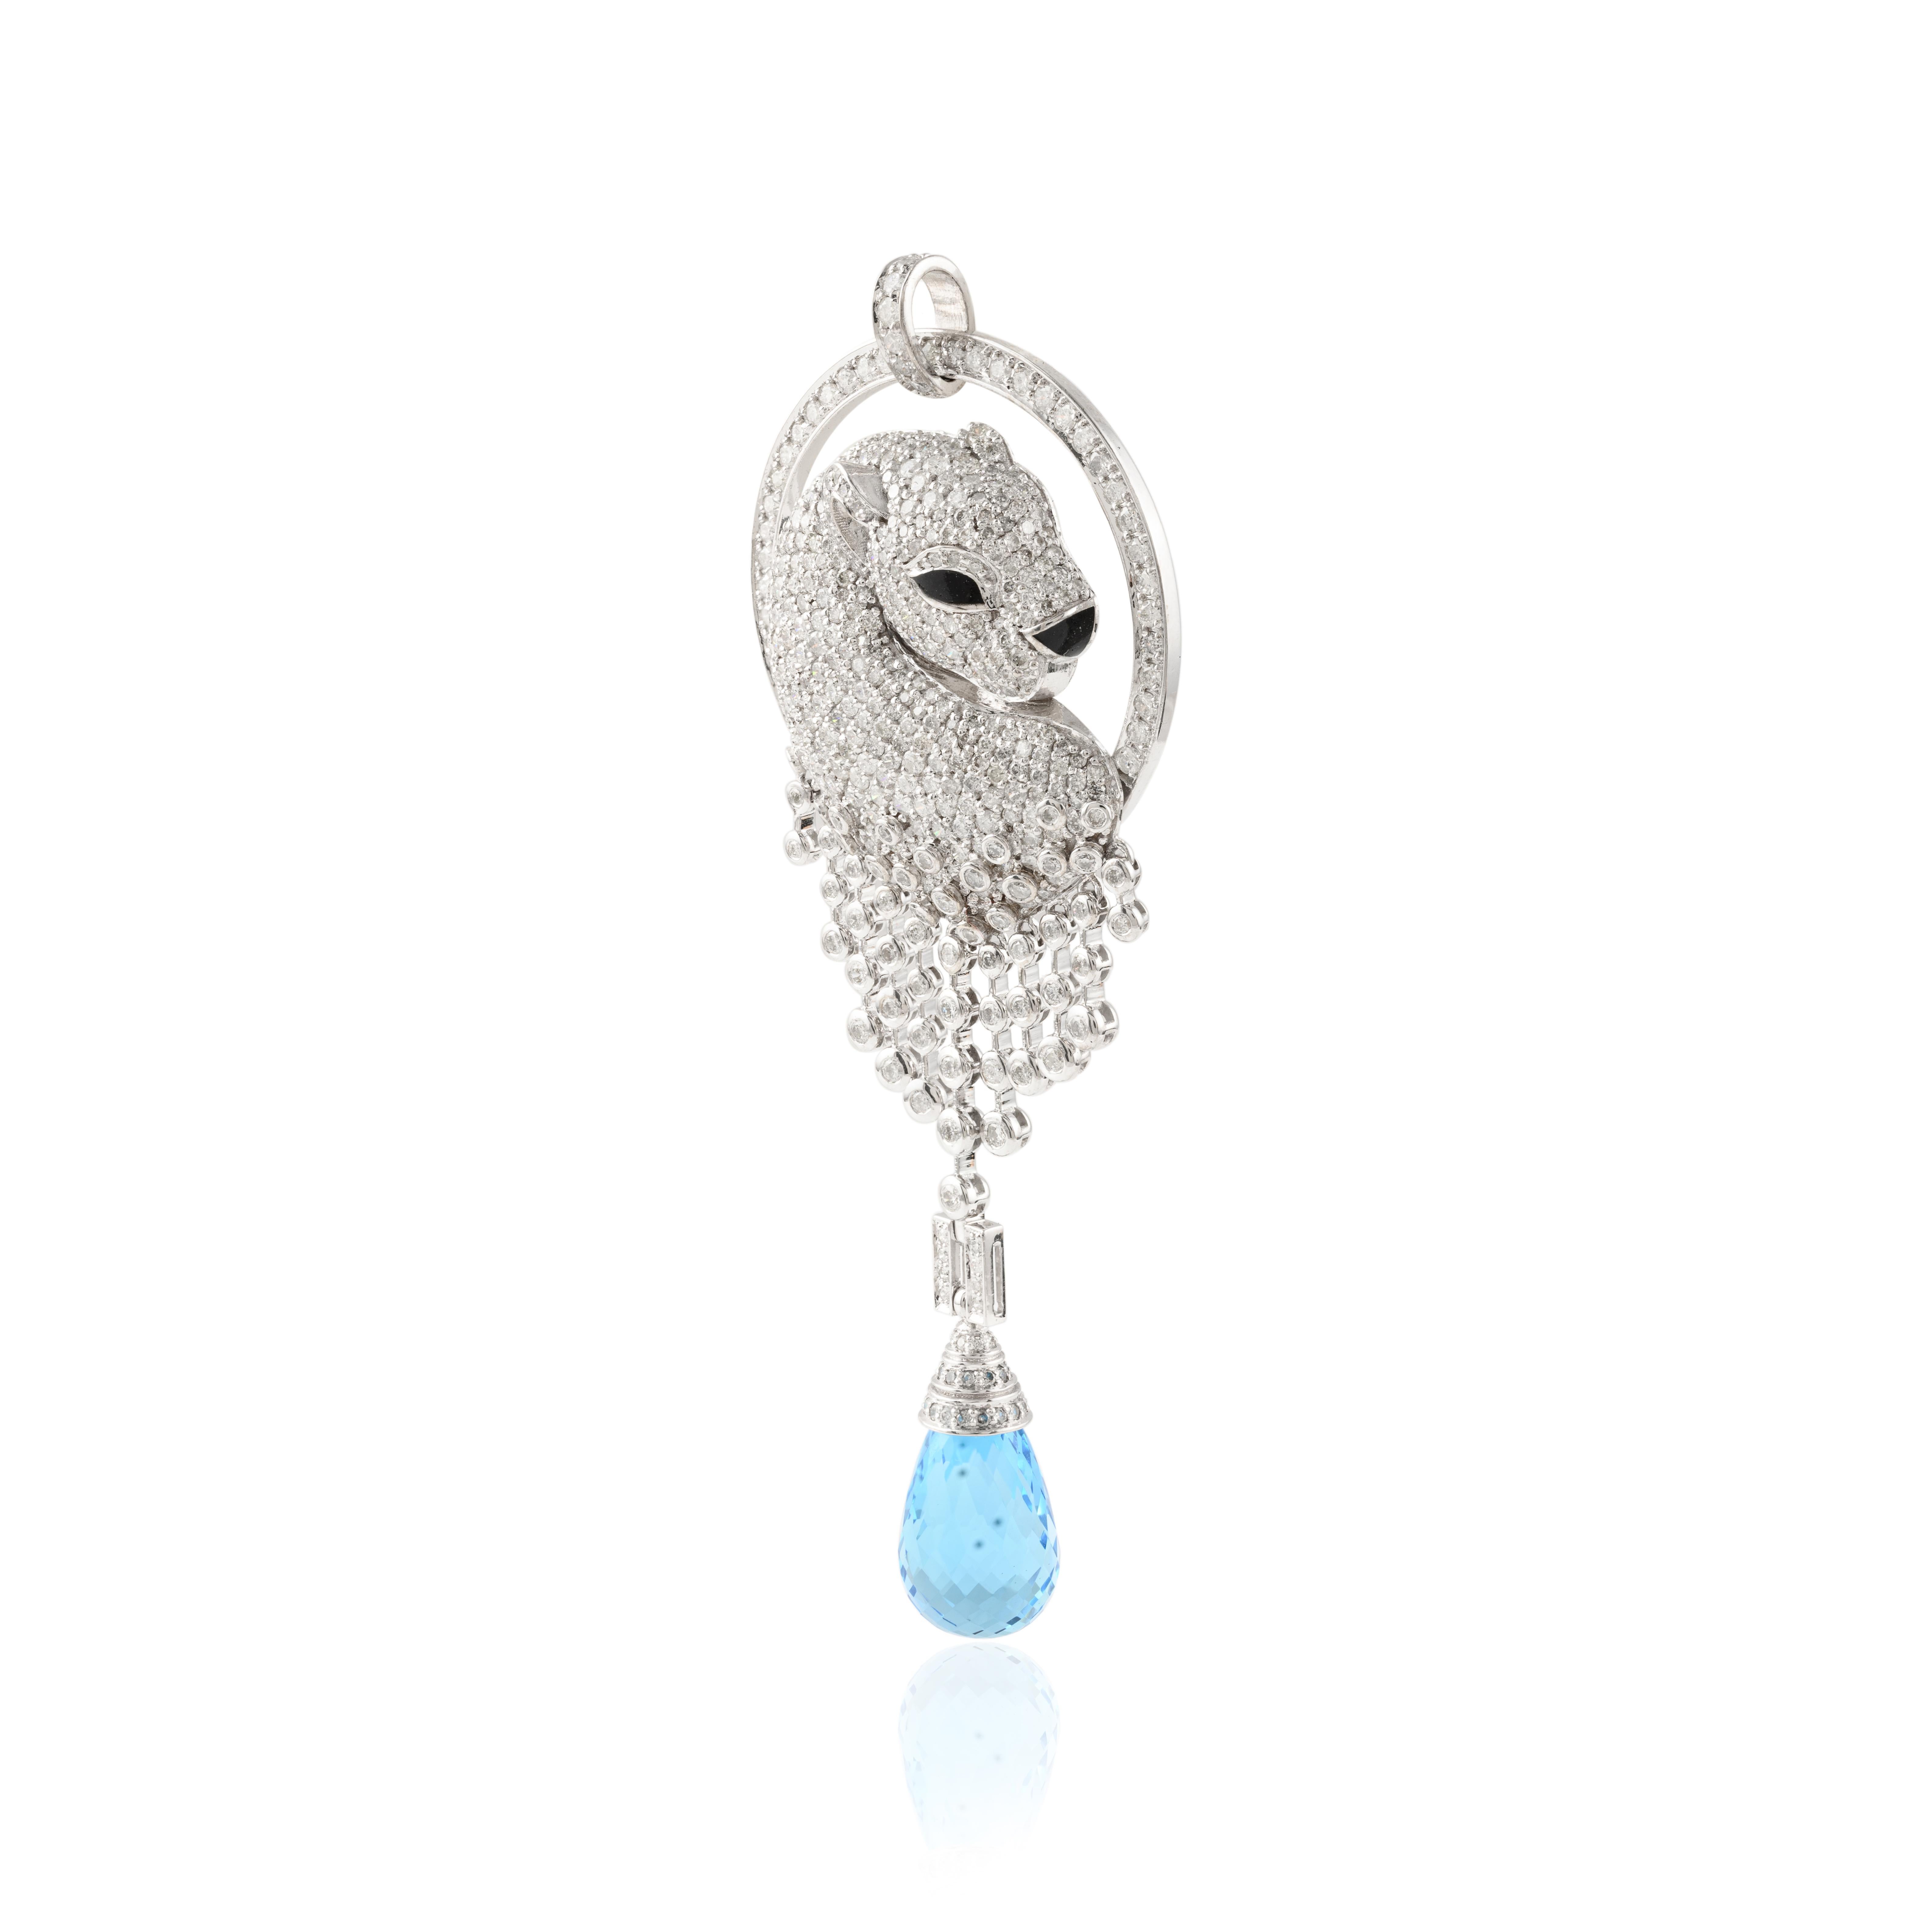 Diamond Panther Pendant in 14K Gold with teardrop blue topaz dangling down. This stunning piece of jewelry instantly elevates a casual look or dressy outfit. 
Panther depicts leadership, fearlessness and strength. Diamond brings love, fame, success